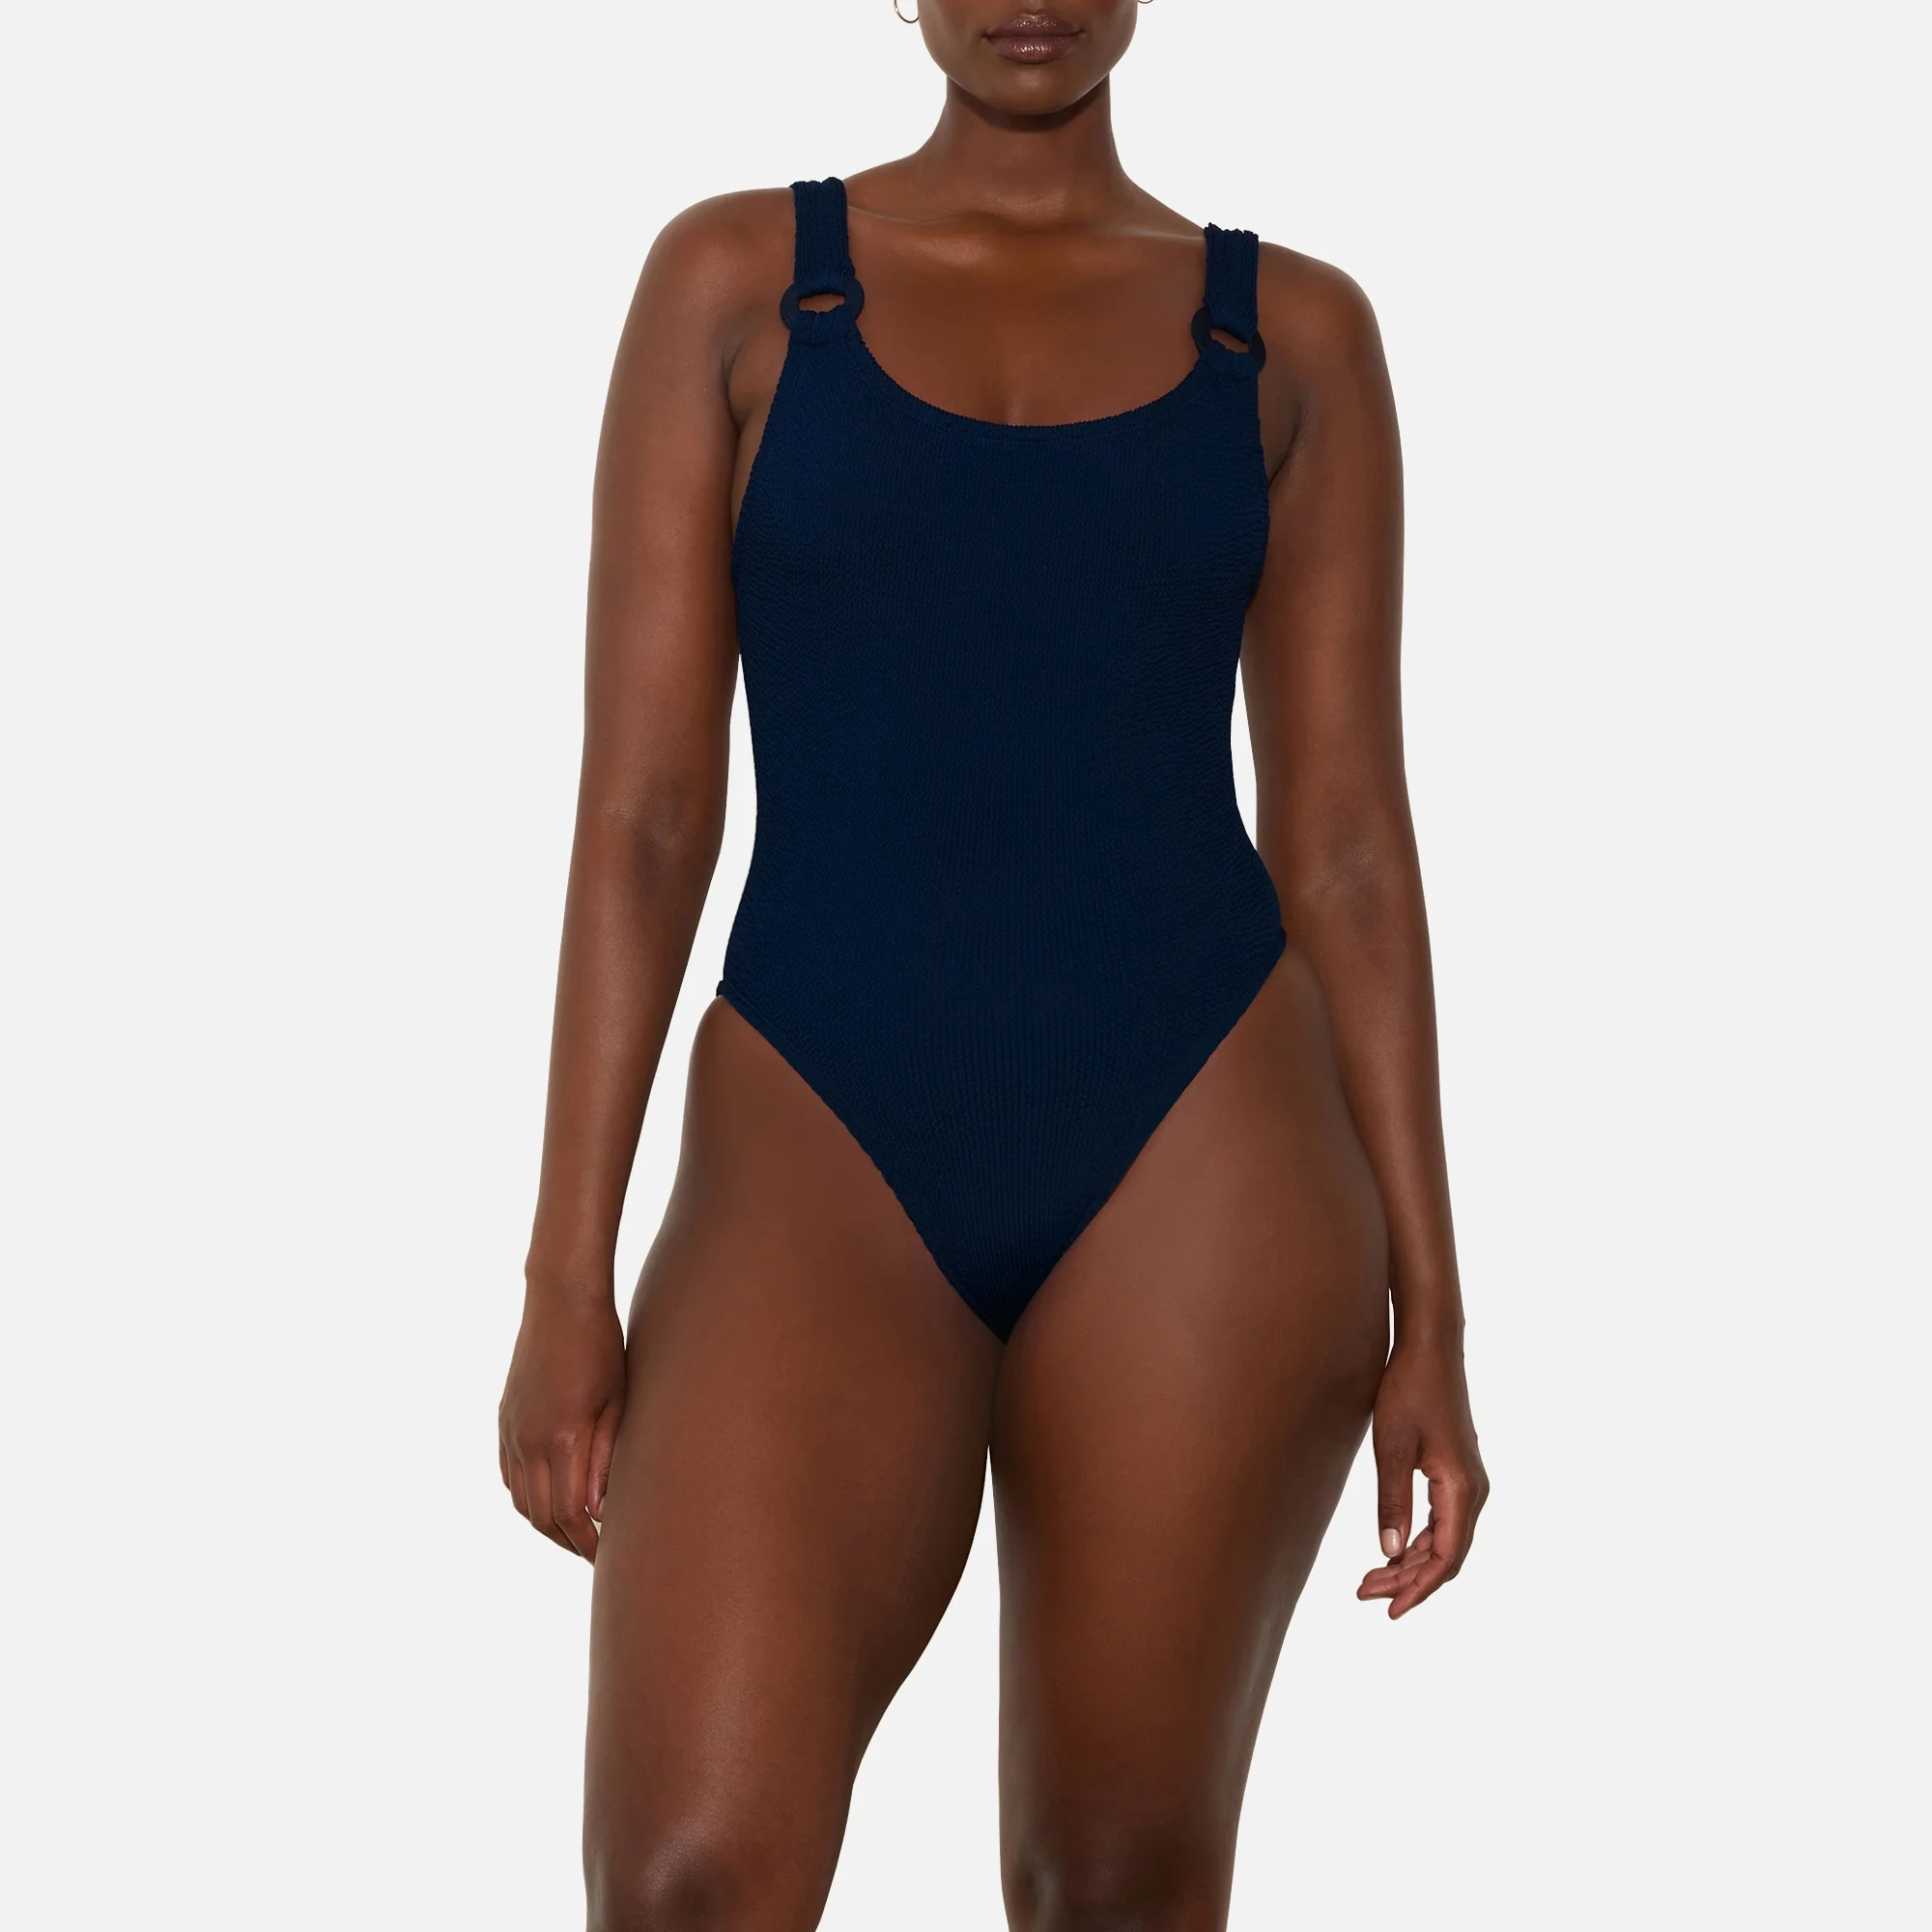 Hunza G Women's Domino Swim With Fabric Covered Hoops - Navy Image 1